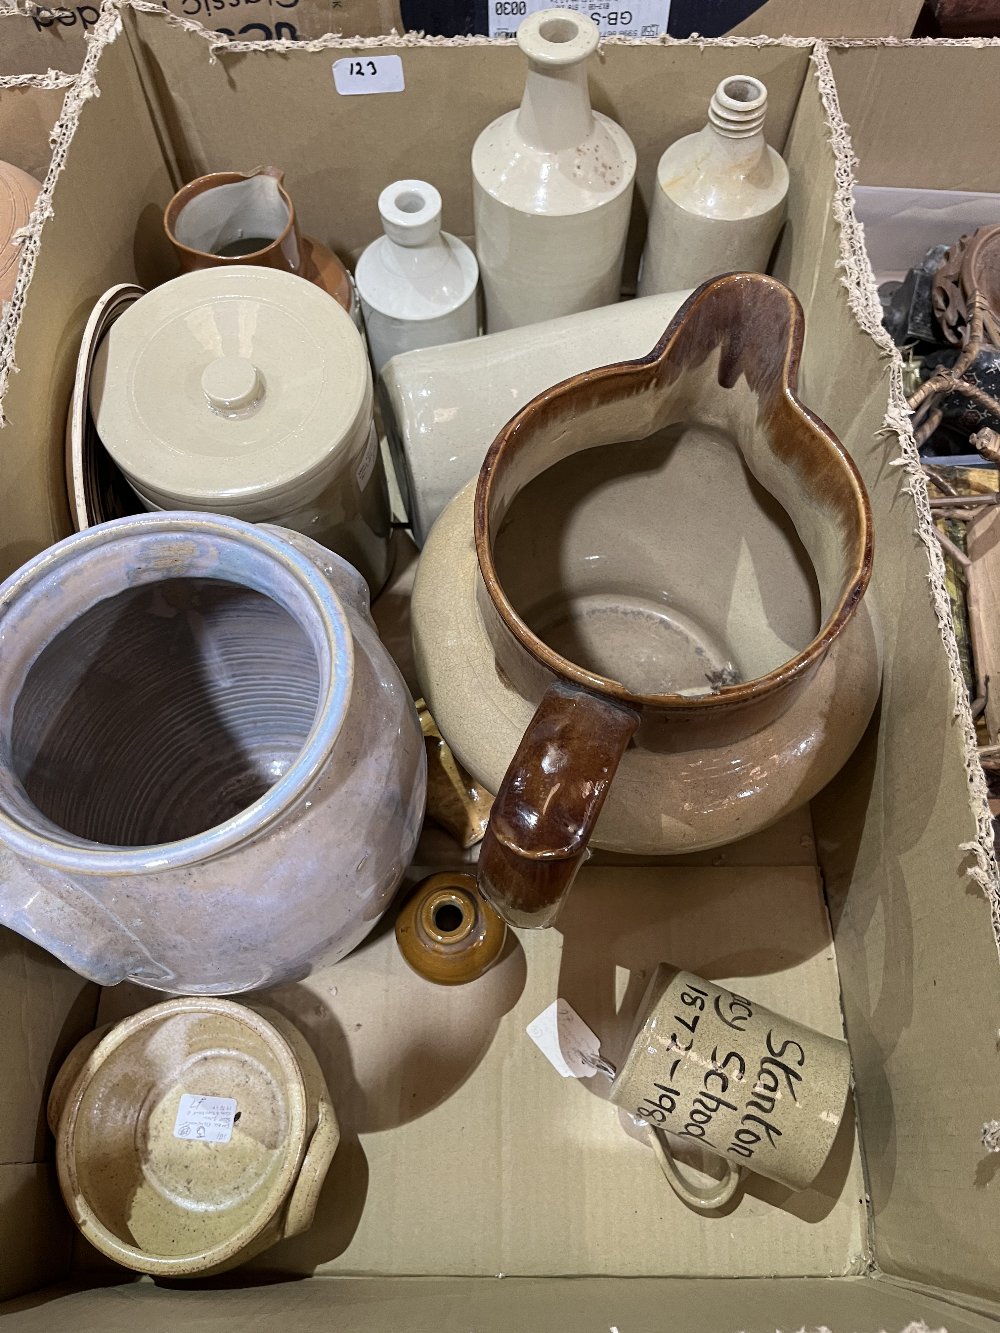 A quantity of pottery and other ceramics - Image 3 of 3